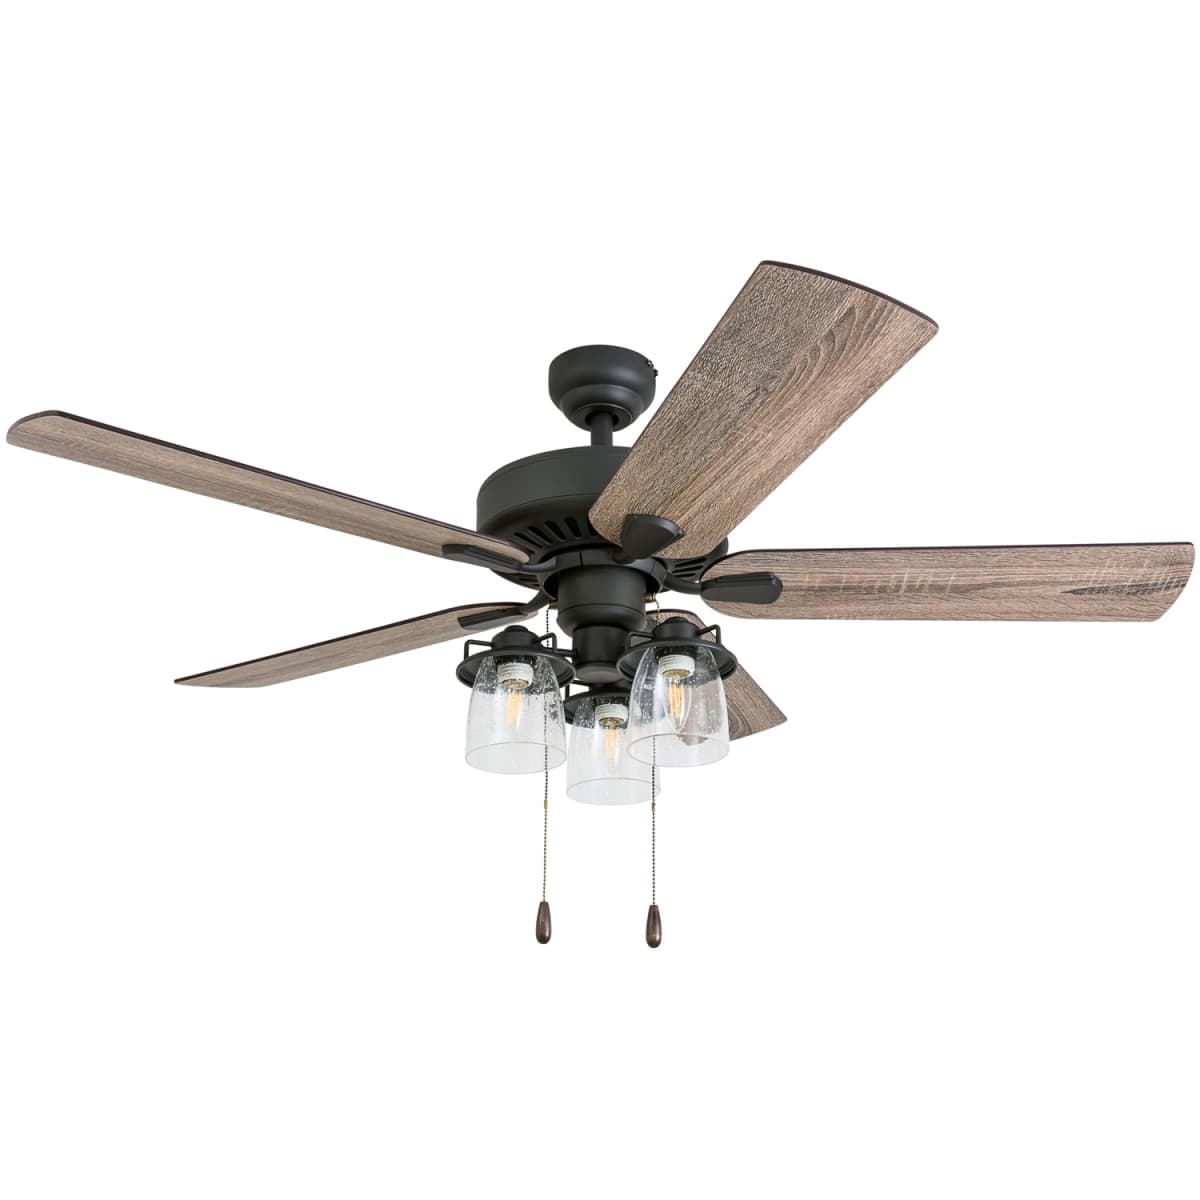 Prominence Home Briarcrest Farmhouse 52" Aged Bronze LED Ceiling Fan W/ Remote 